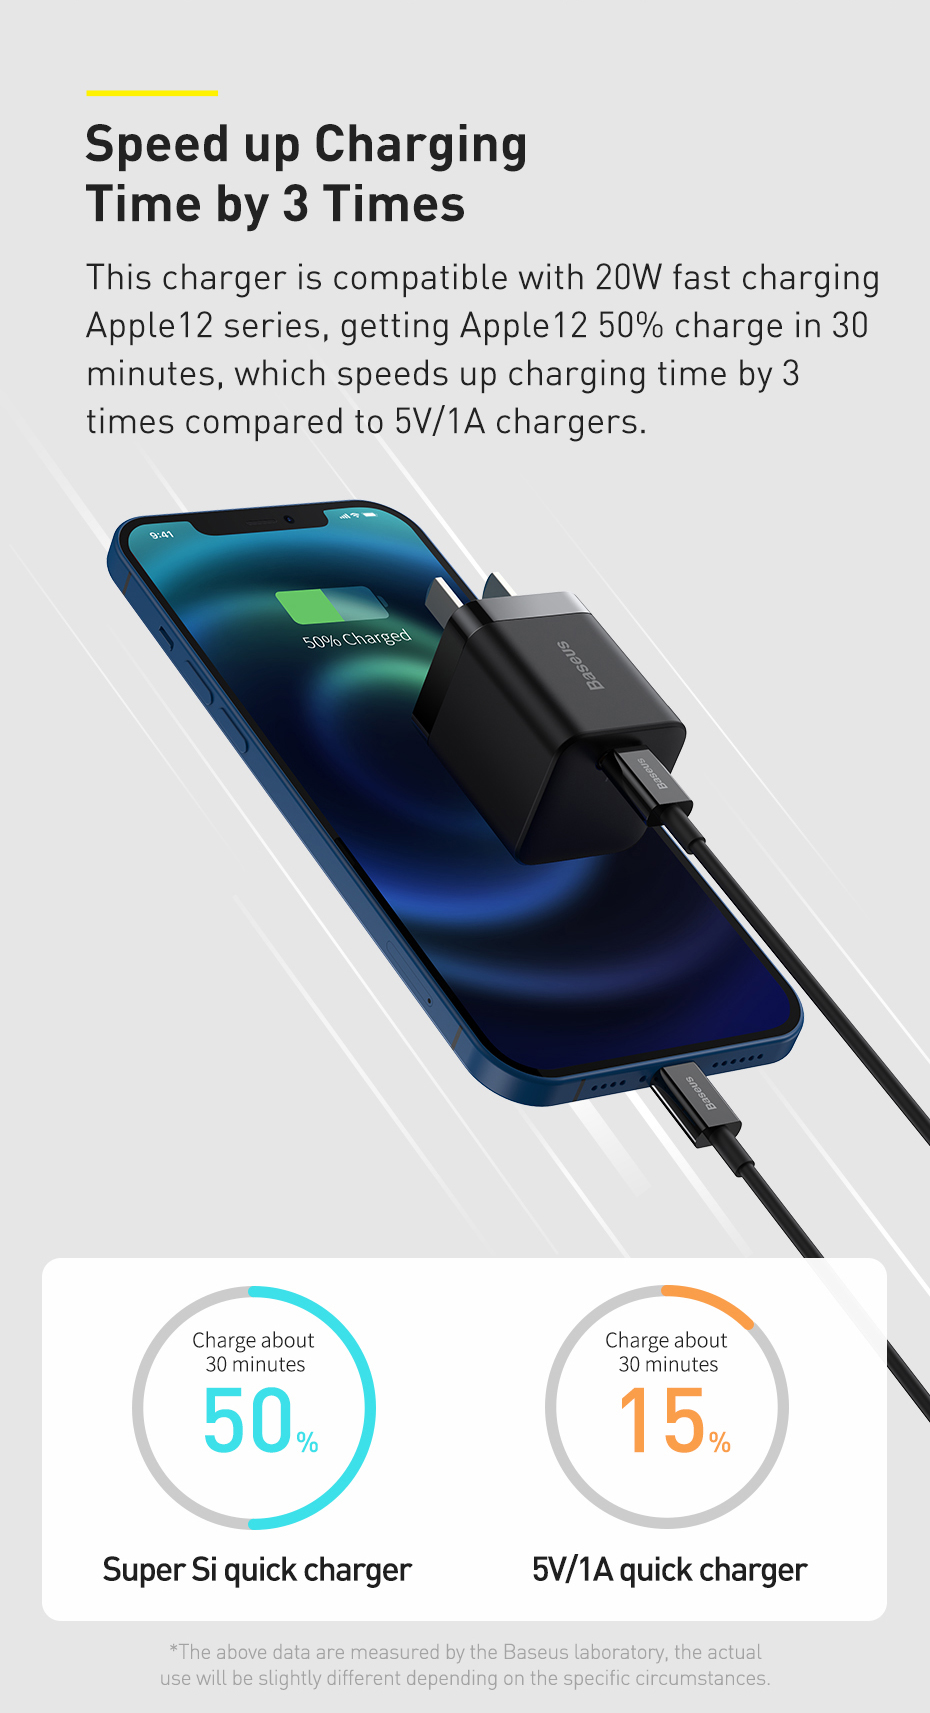 This charger is compatible with 20W fast charging Apple12 series, getting Apple 12 50% charge in 30 minutes, which speeds up charging time by 3 times compared to 5V/1A chargers.